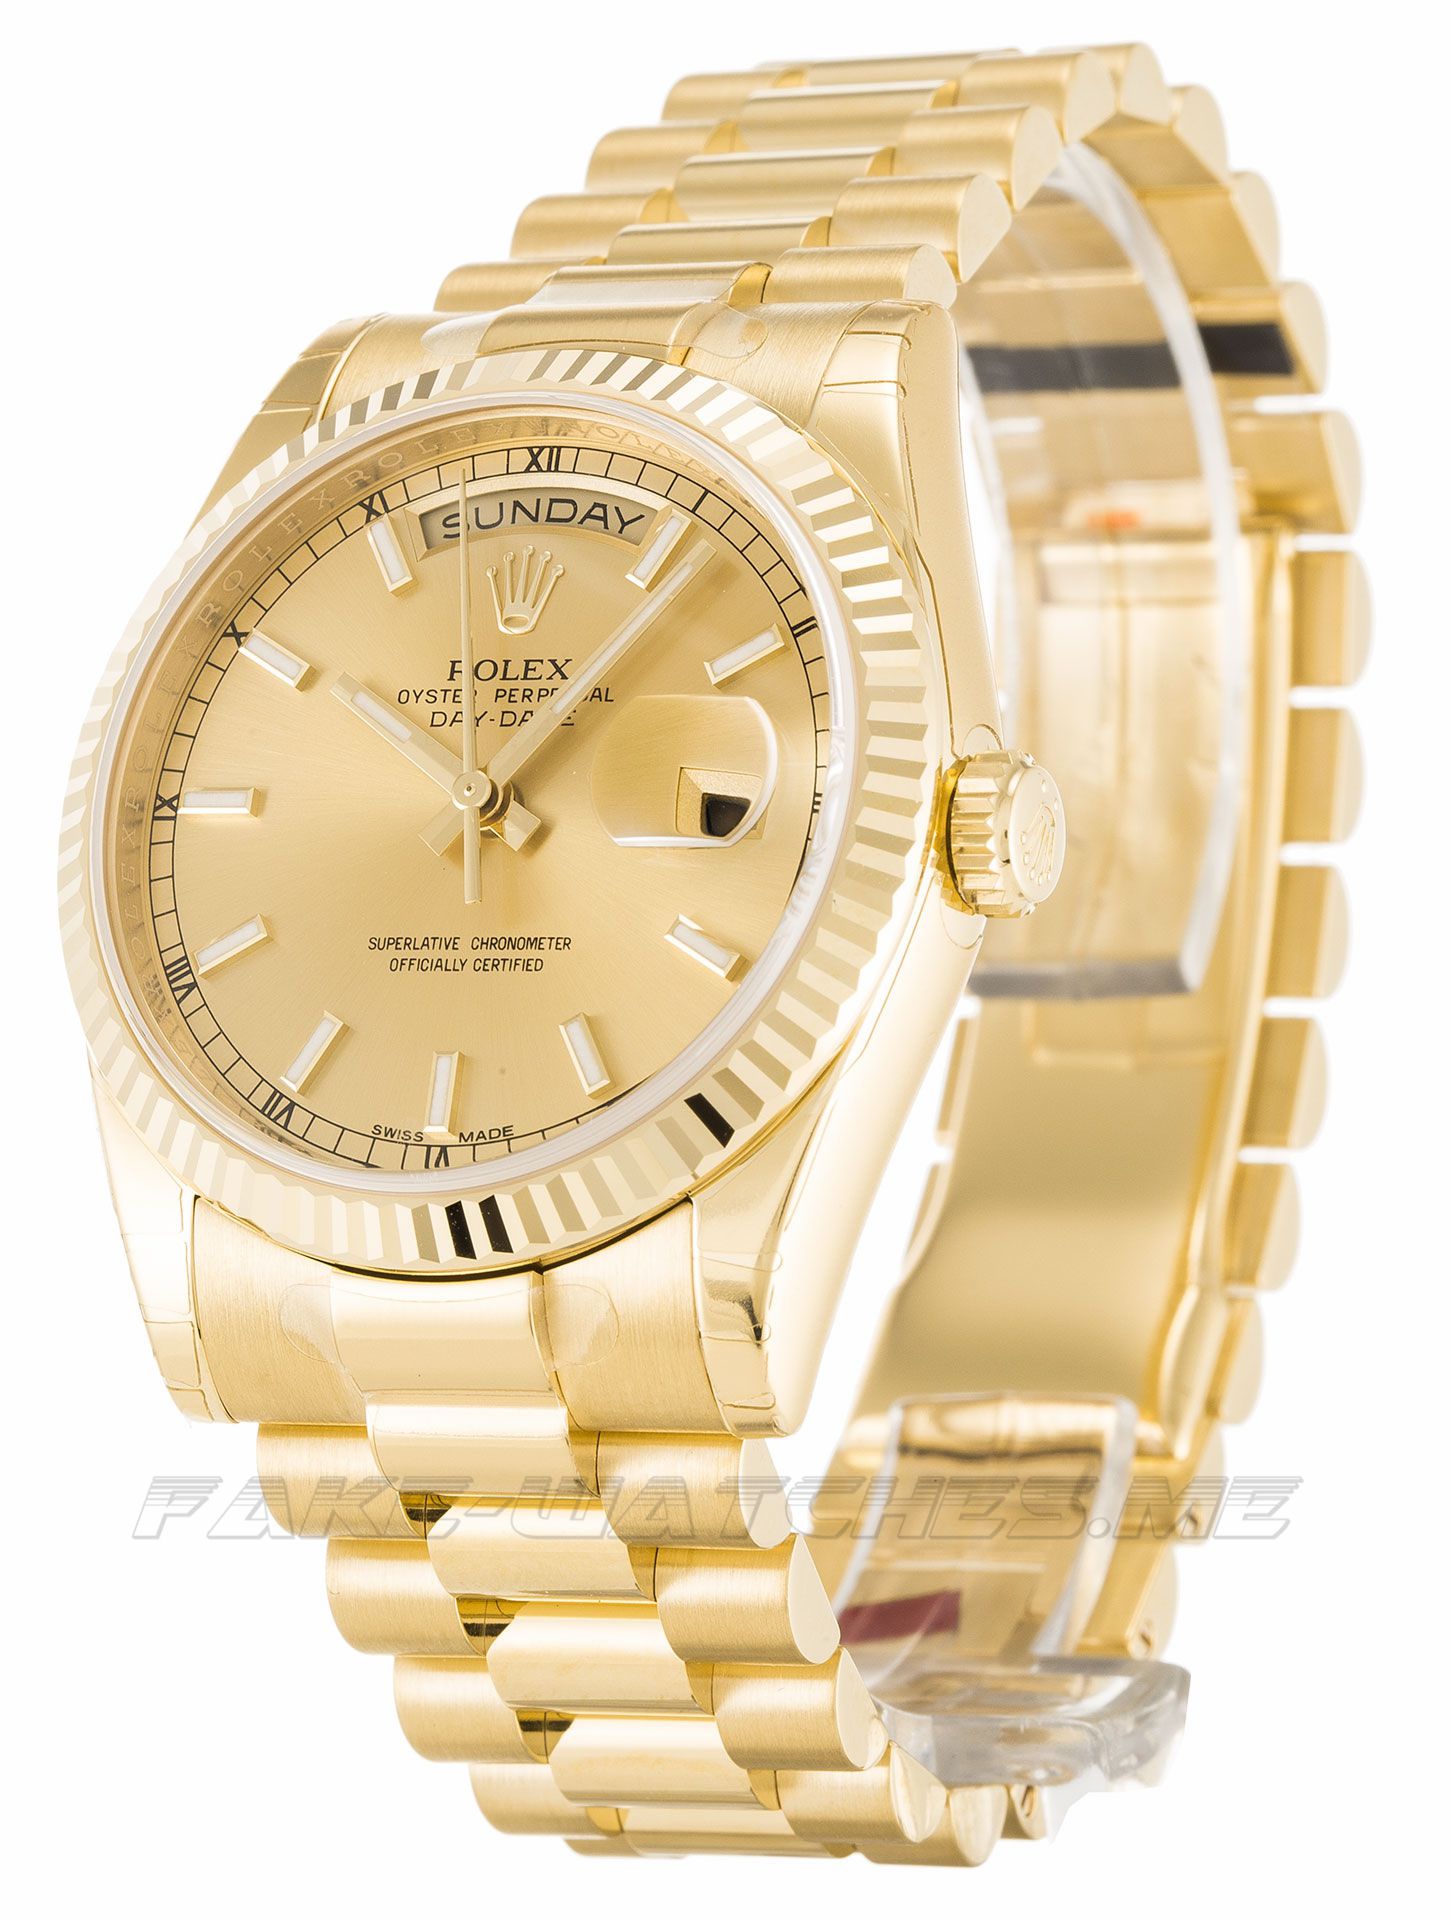 Rolex Day Date Mens Automatic 118238